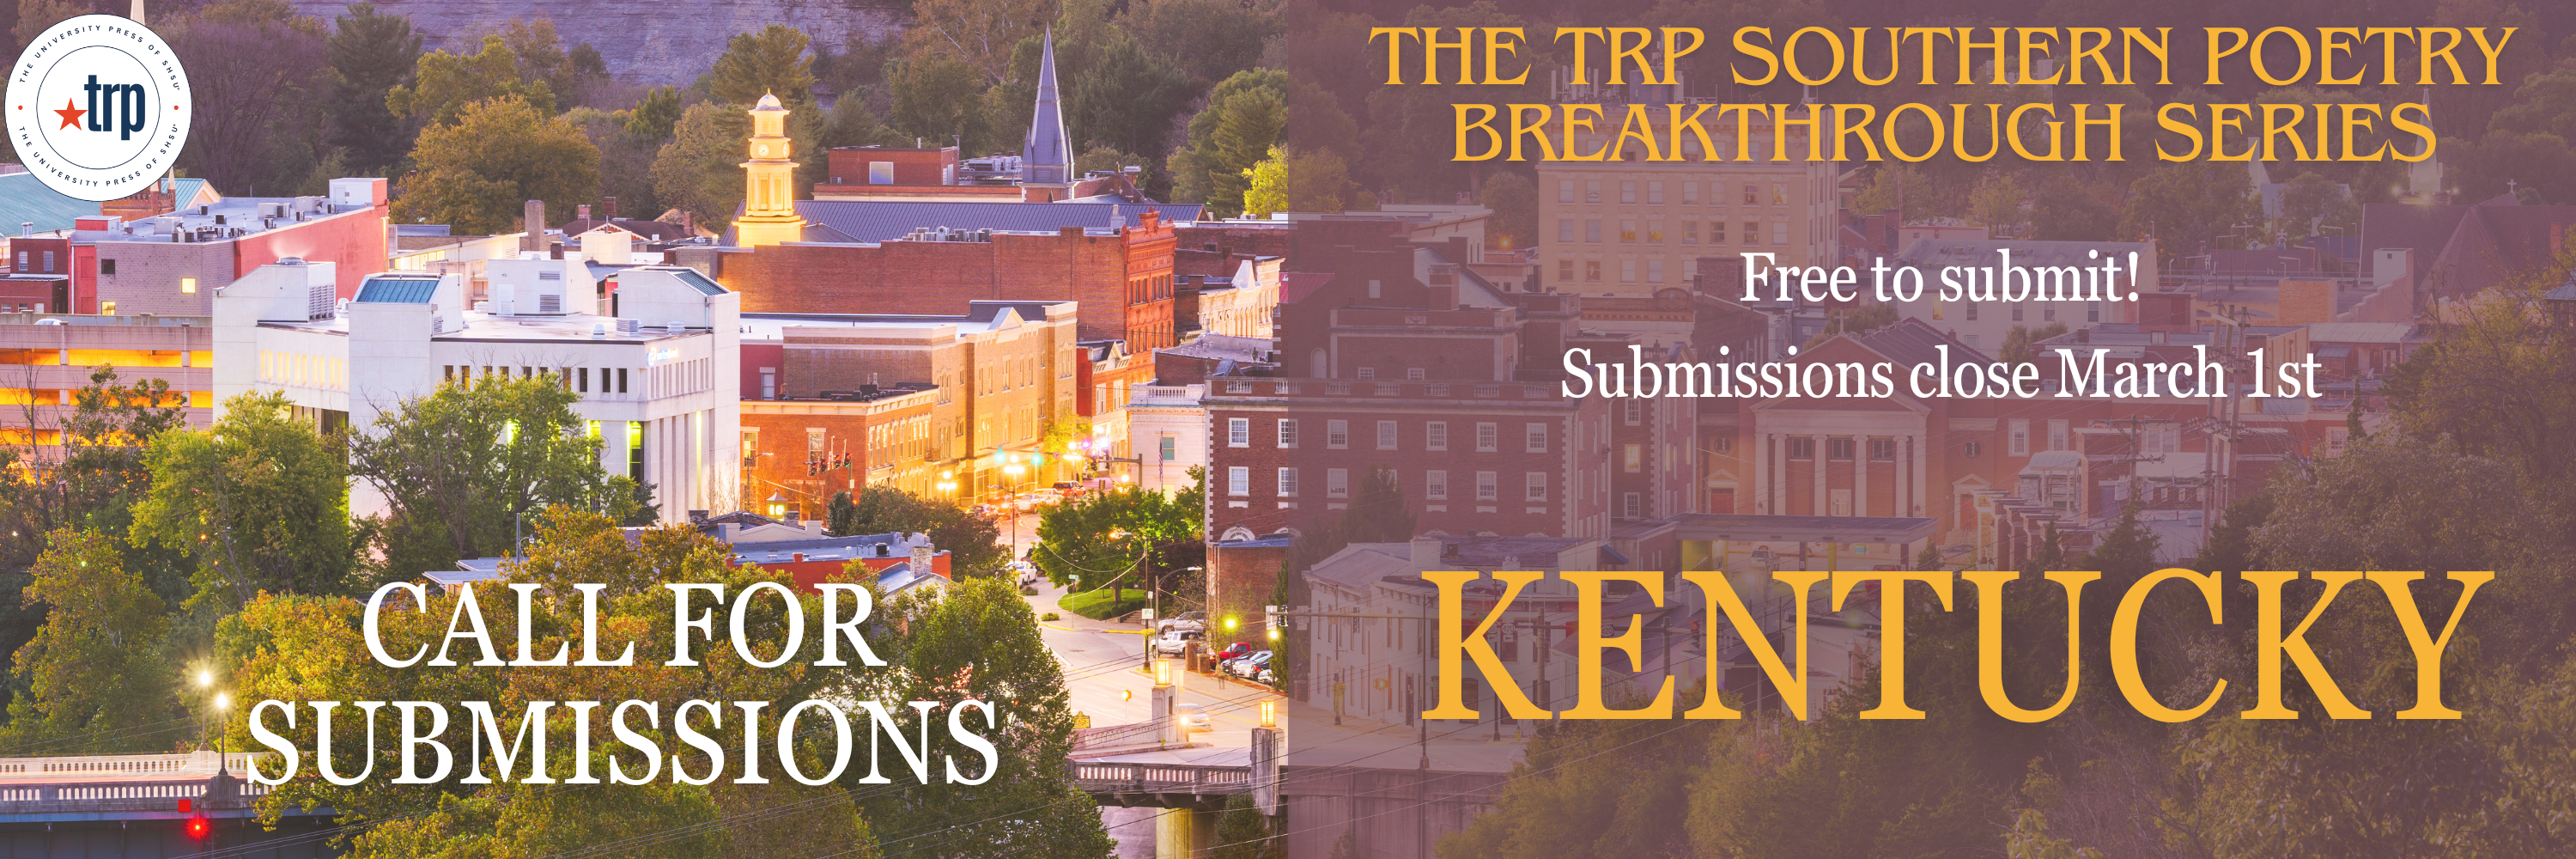 Call for Submissions! The TRP Southern Poetry Breakthrough Series. Free to submit! Submissions close March first. Open to any poet born in or residing in Kentucky who has not published a full-length poetry collection.